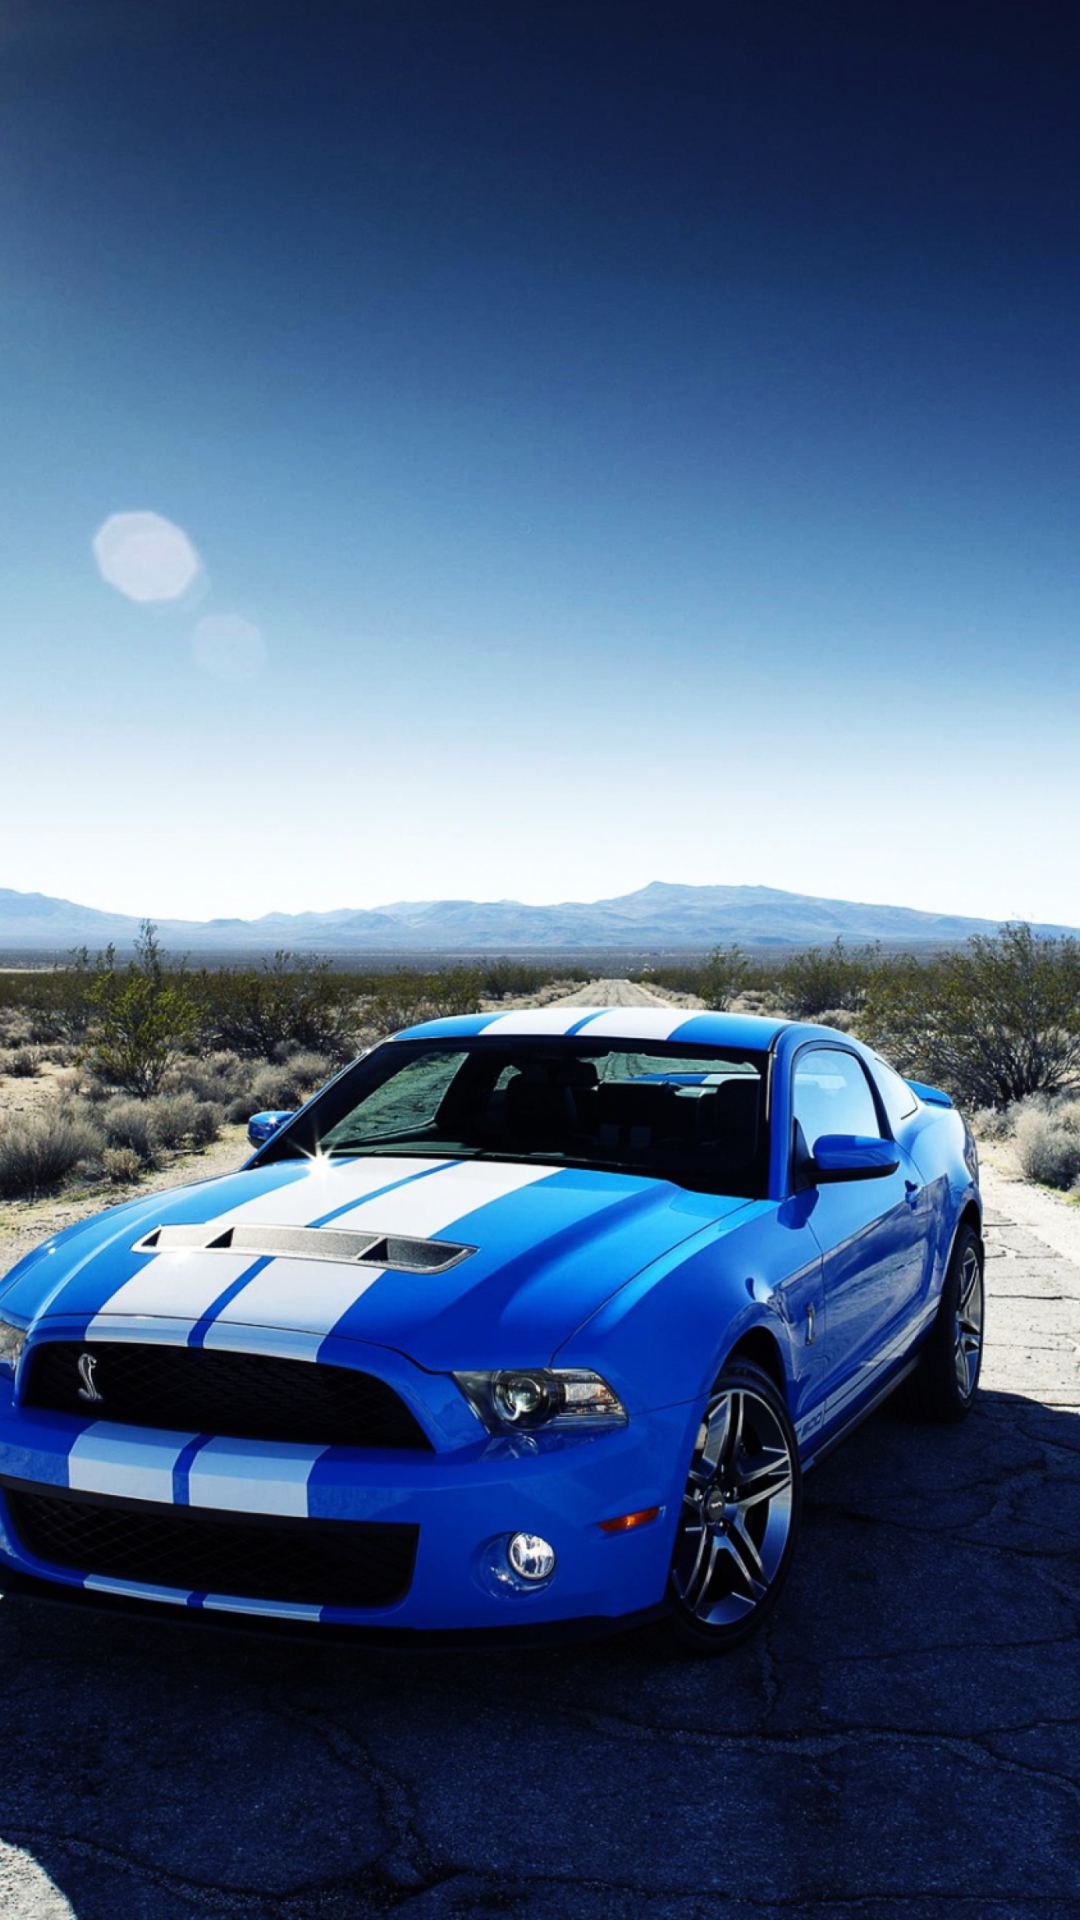 Ford Shelby Gt500 wallpaper 1080x1920